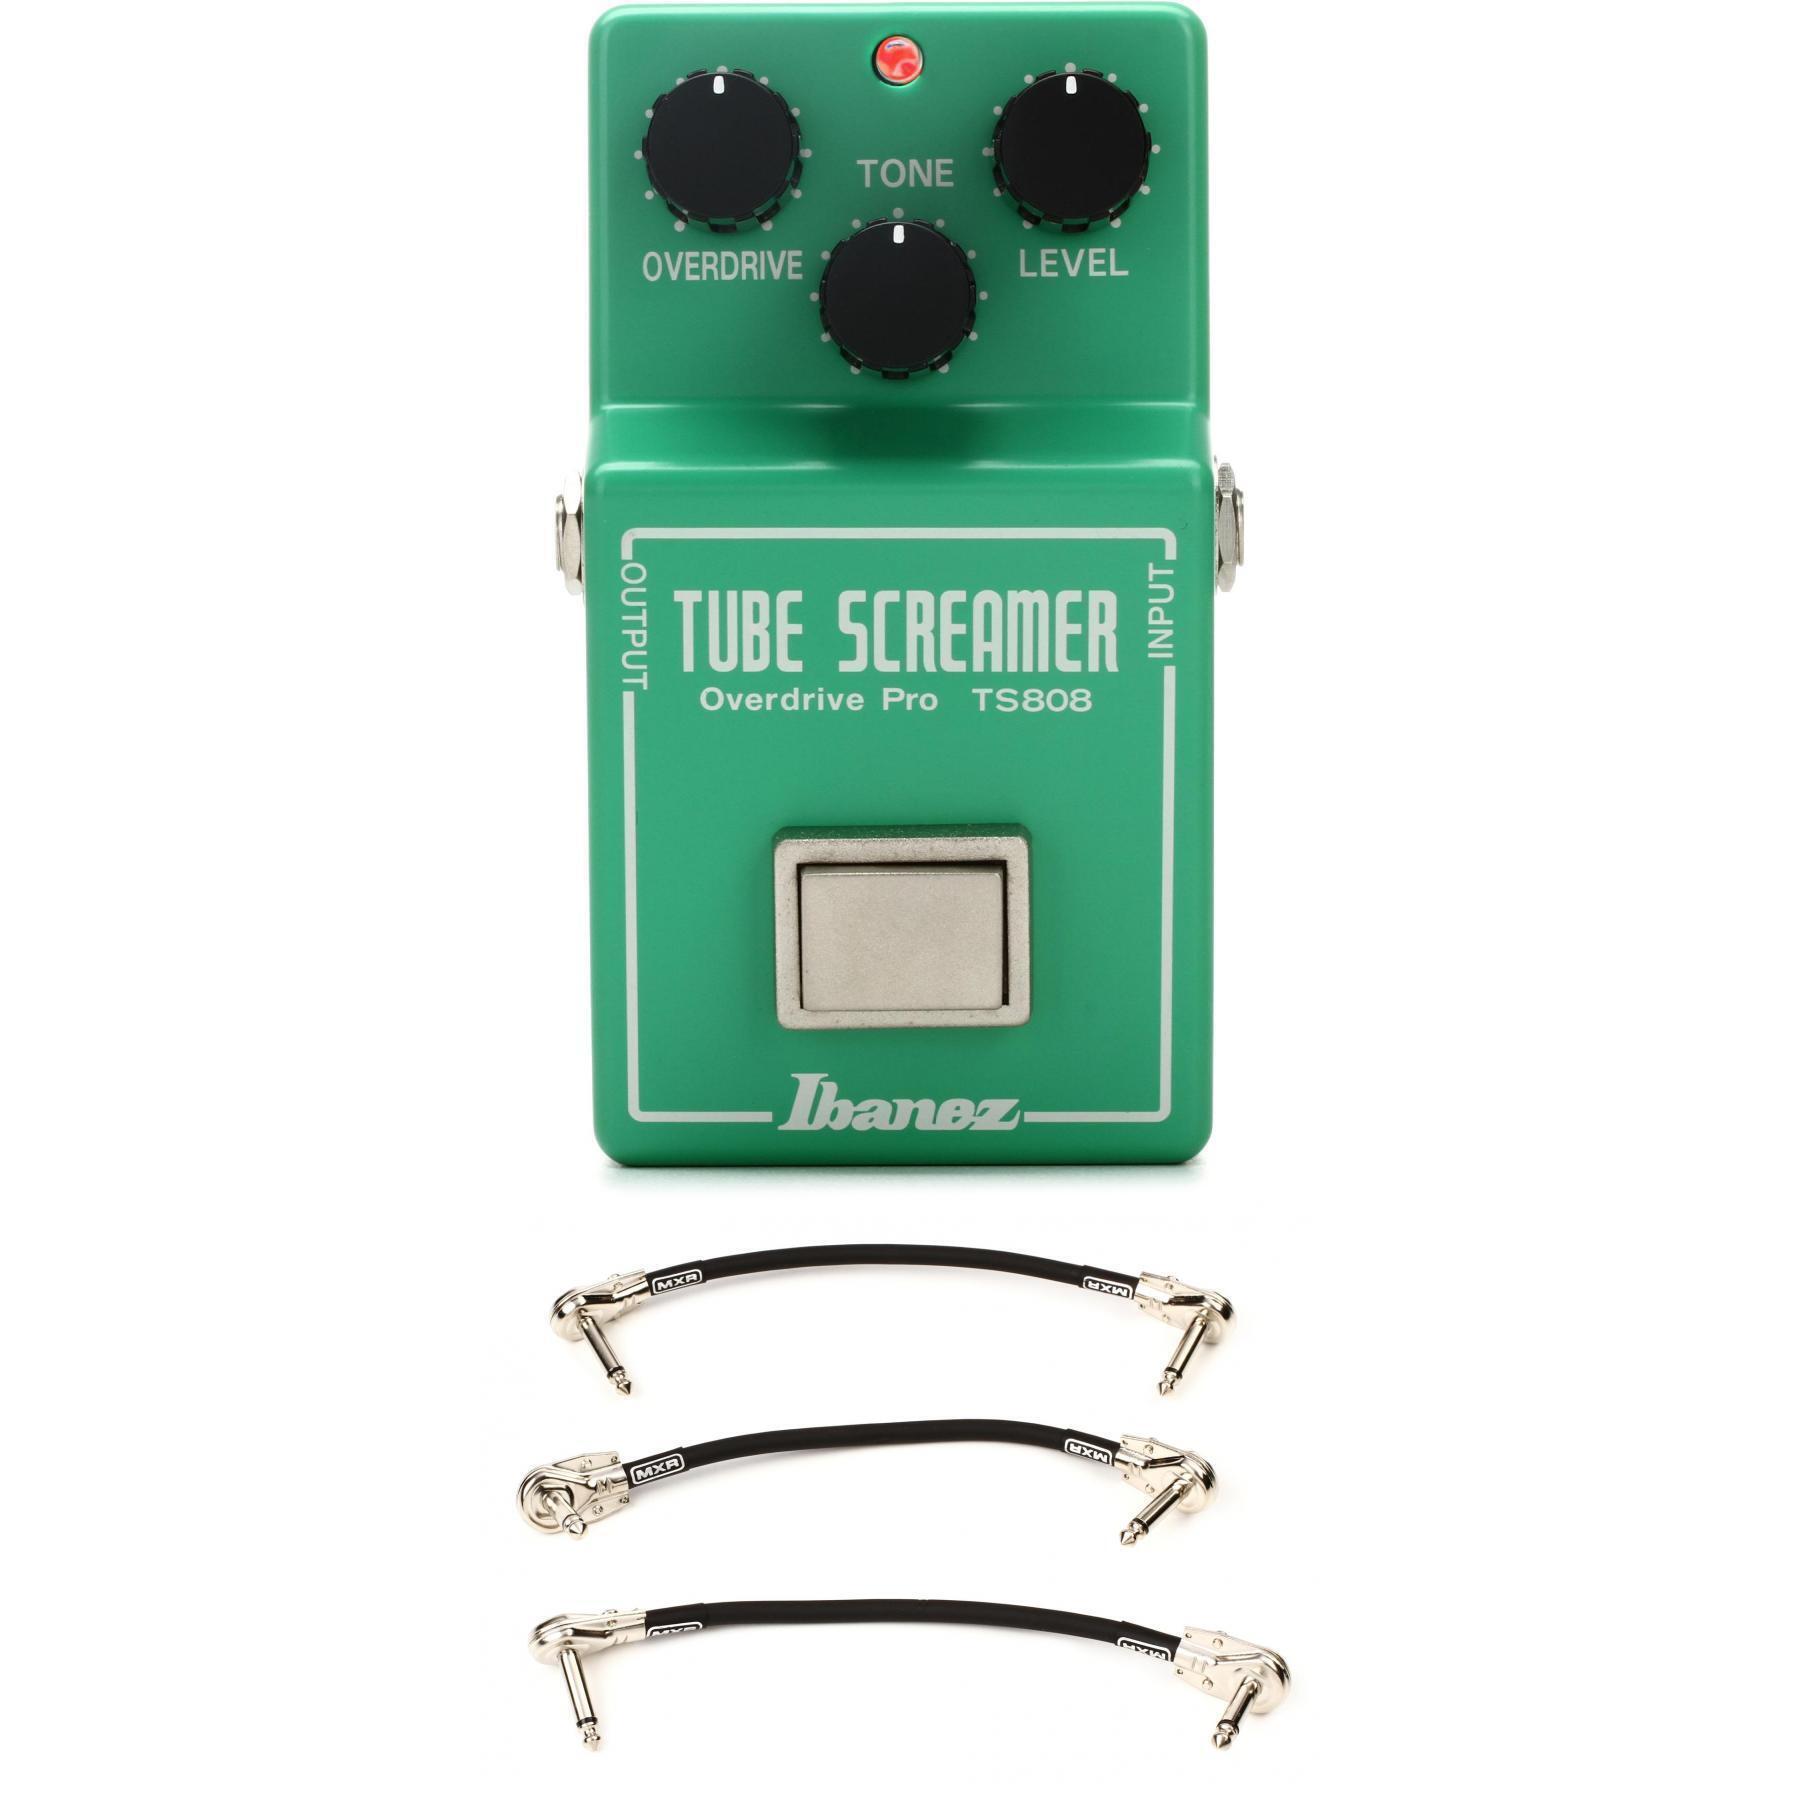 TS808 Original Tube Screamer Overdrive Pedal with 3 Patch Cables